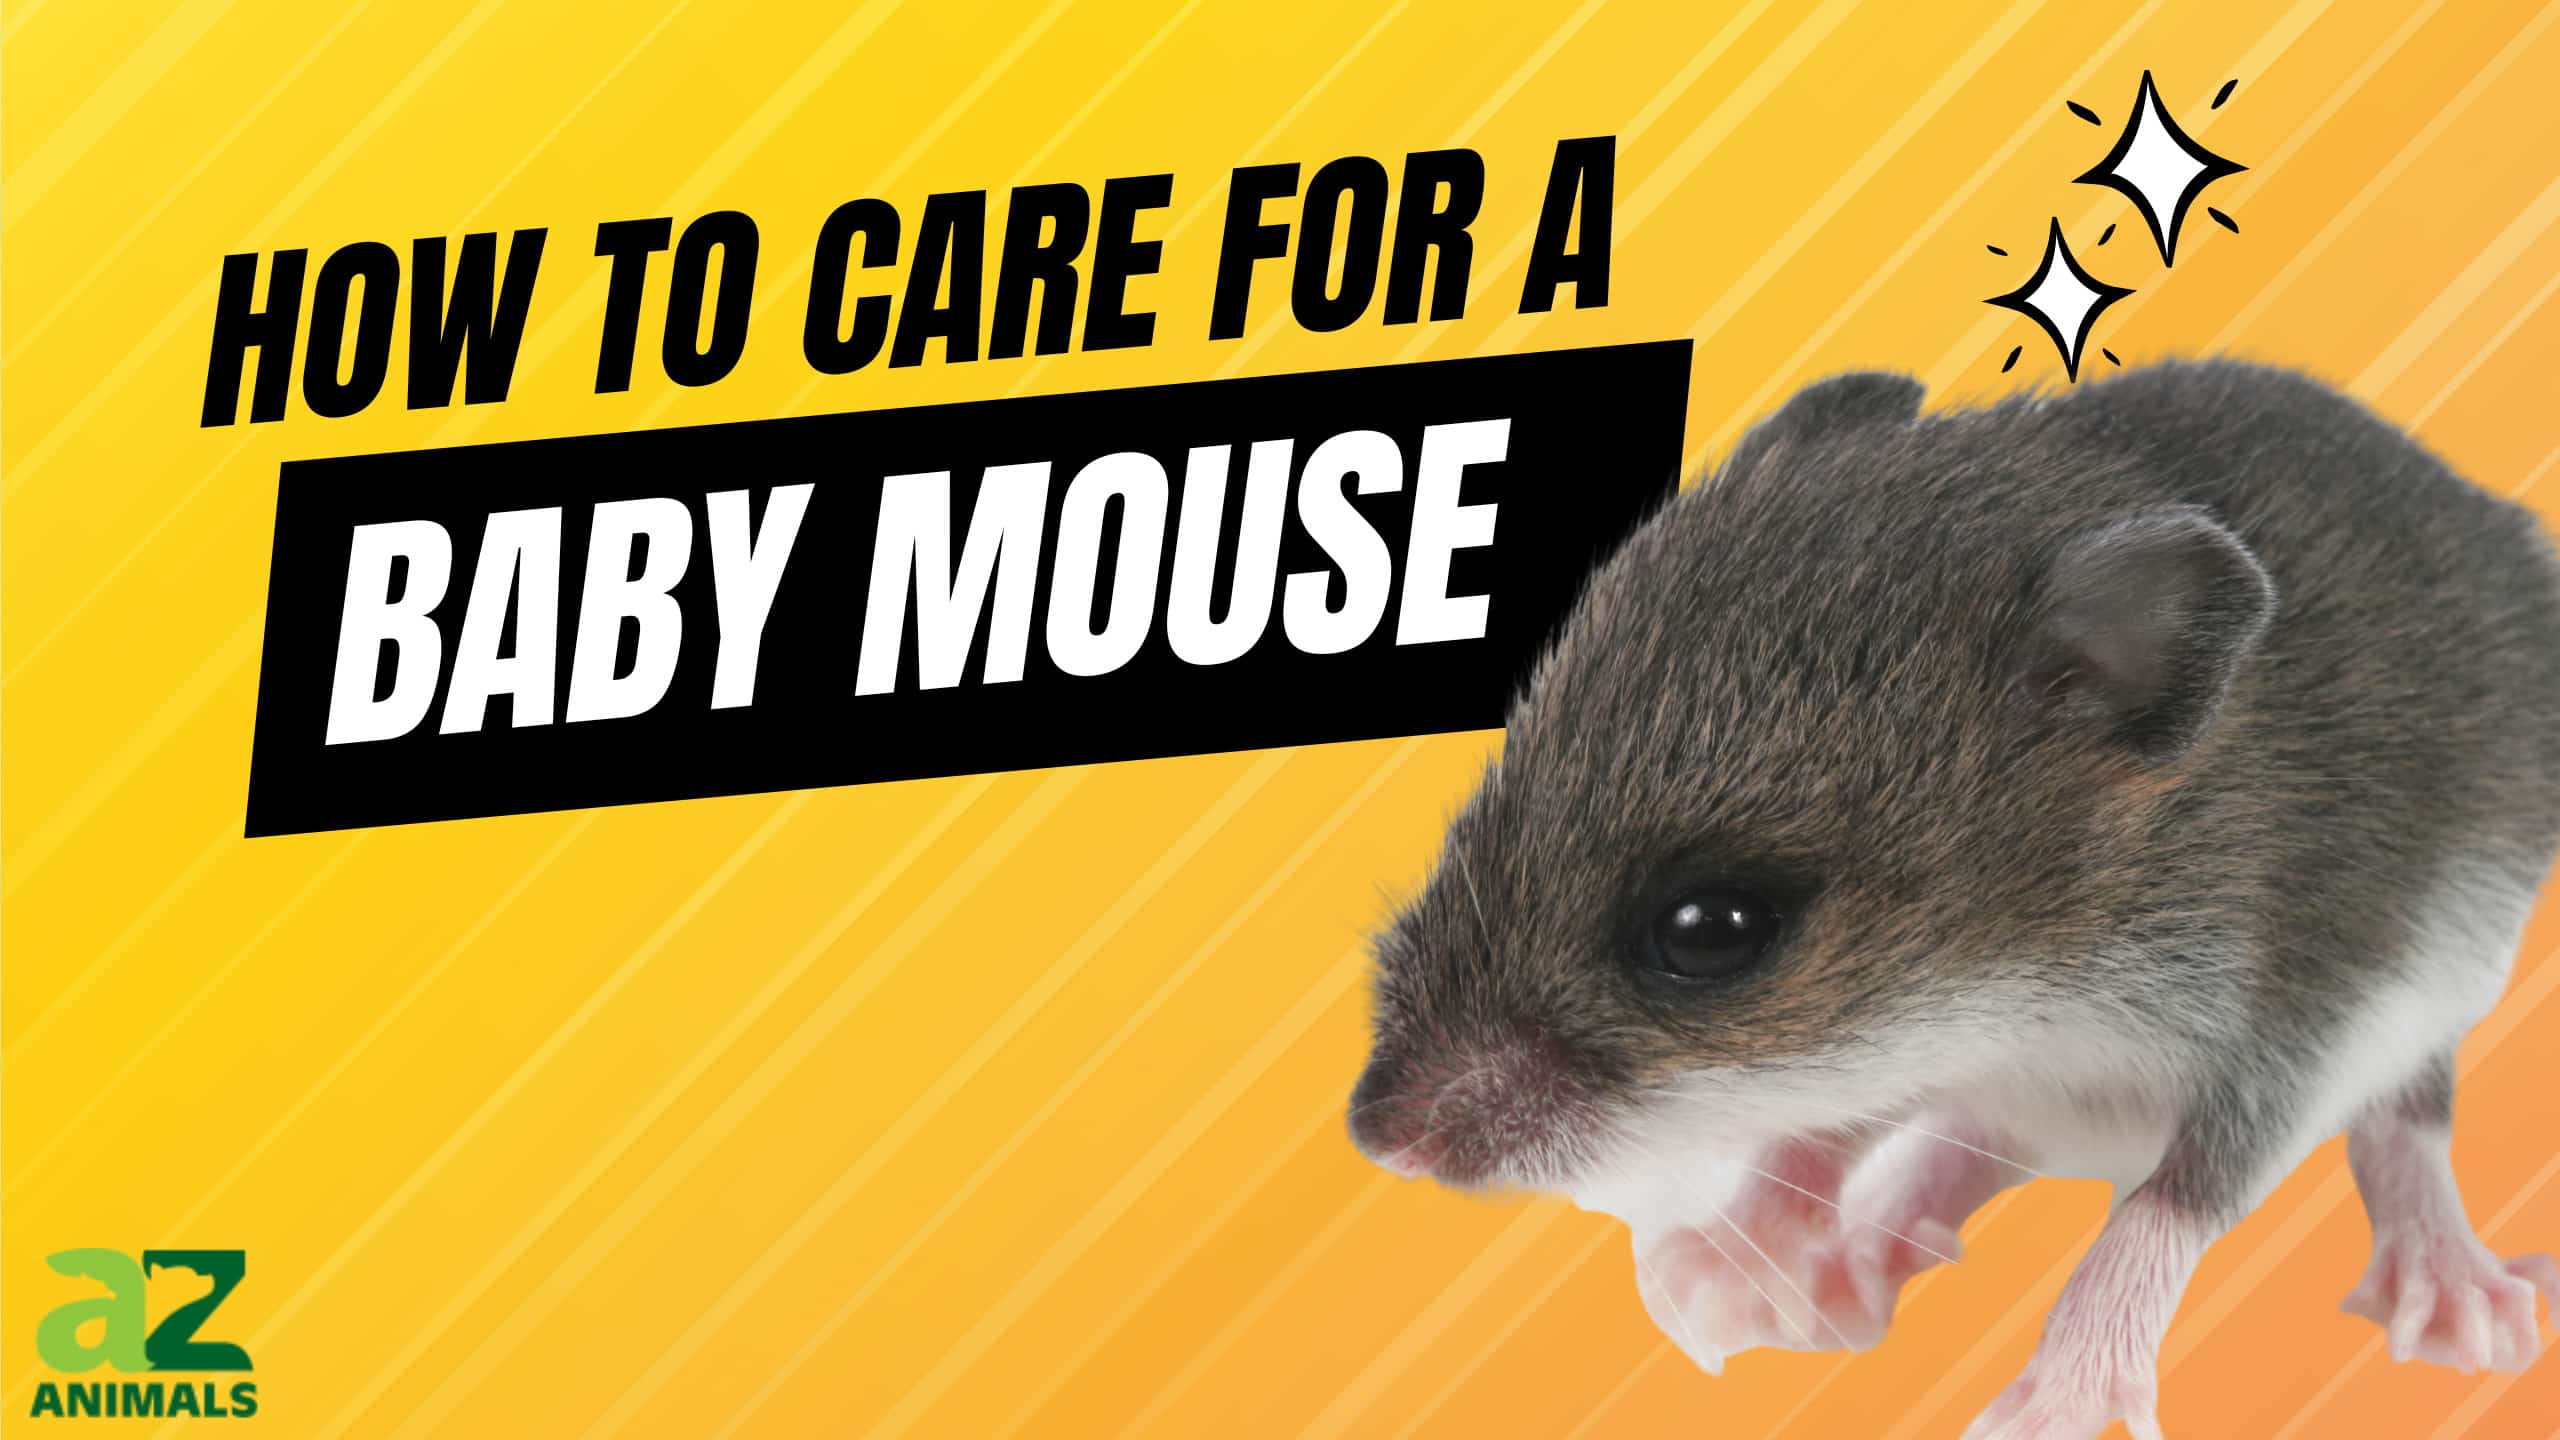 Care for Baby Mouse